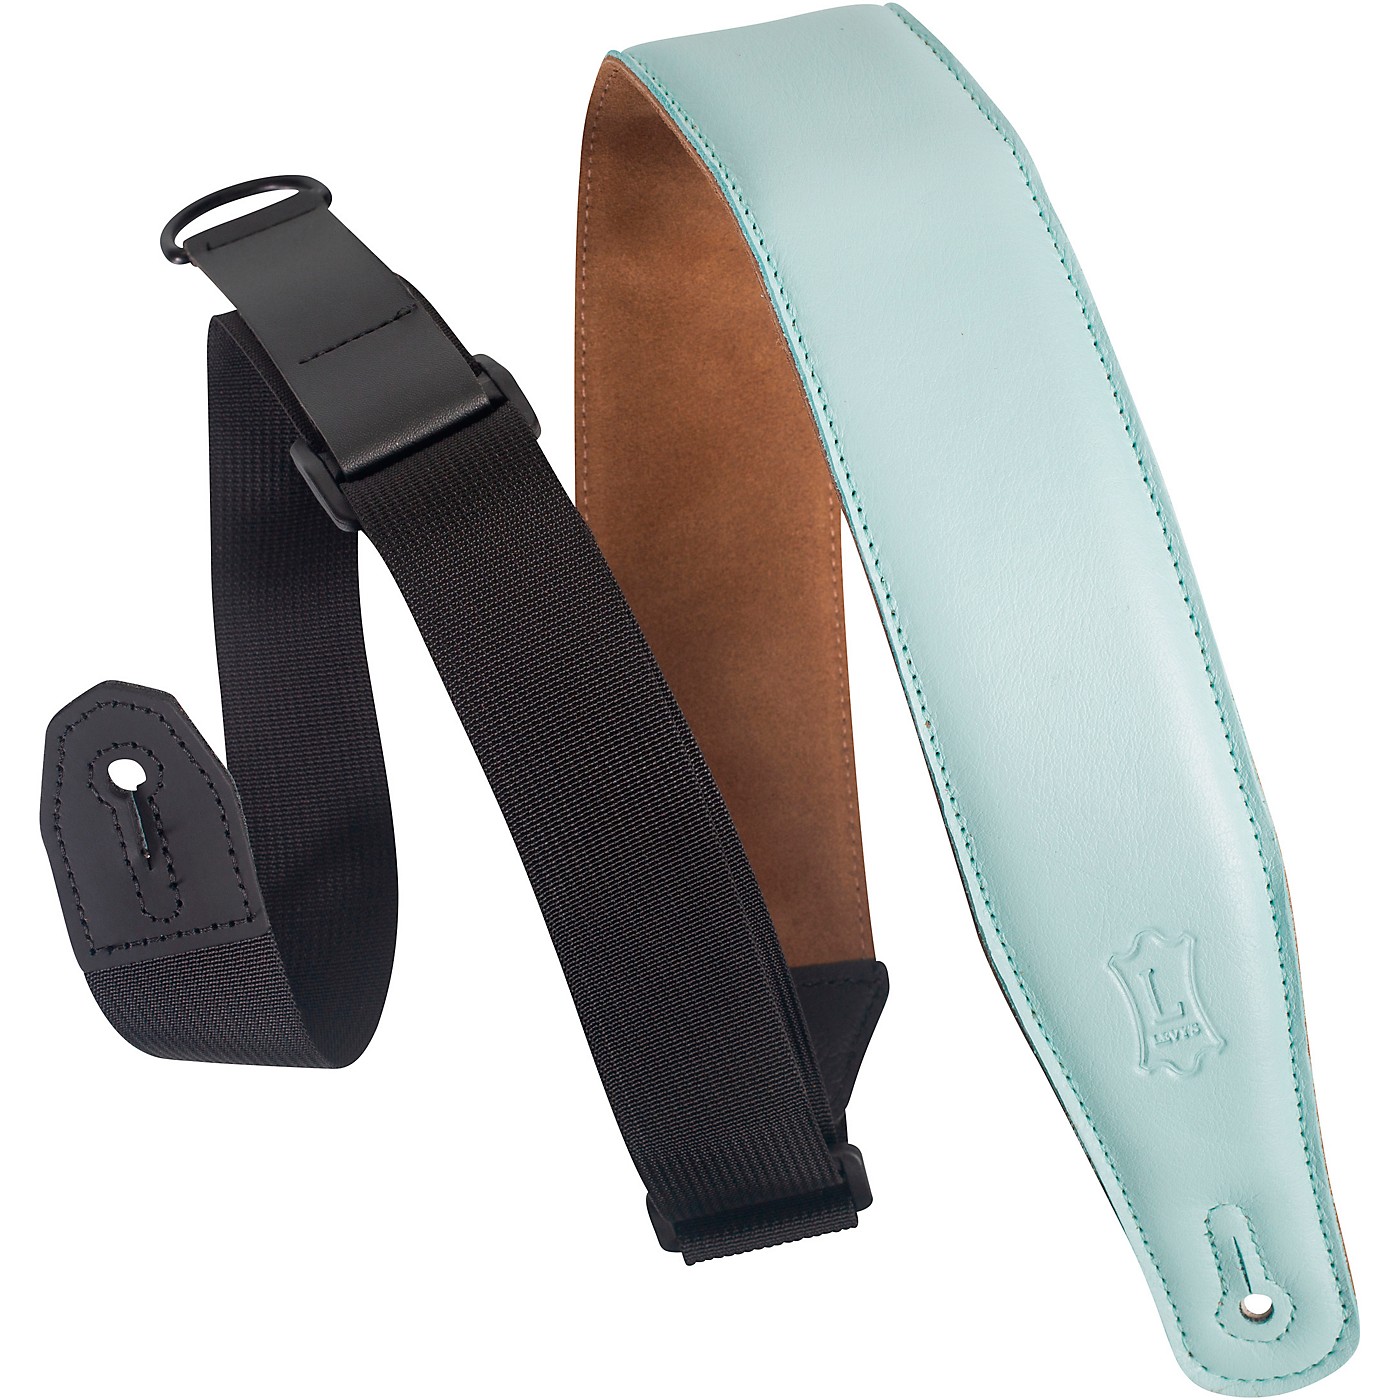 Levy's MRHGS 2 1/2 inch Wide Ergonomic RipChord Guitar Strap thumbnail